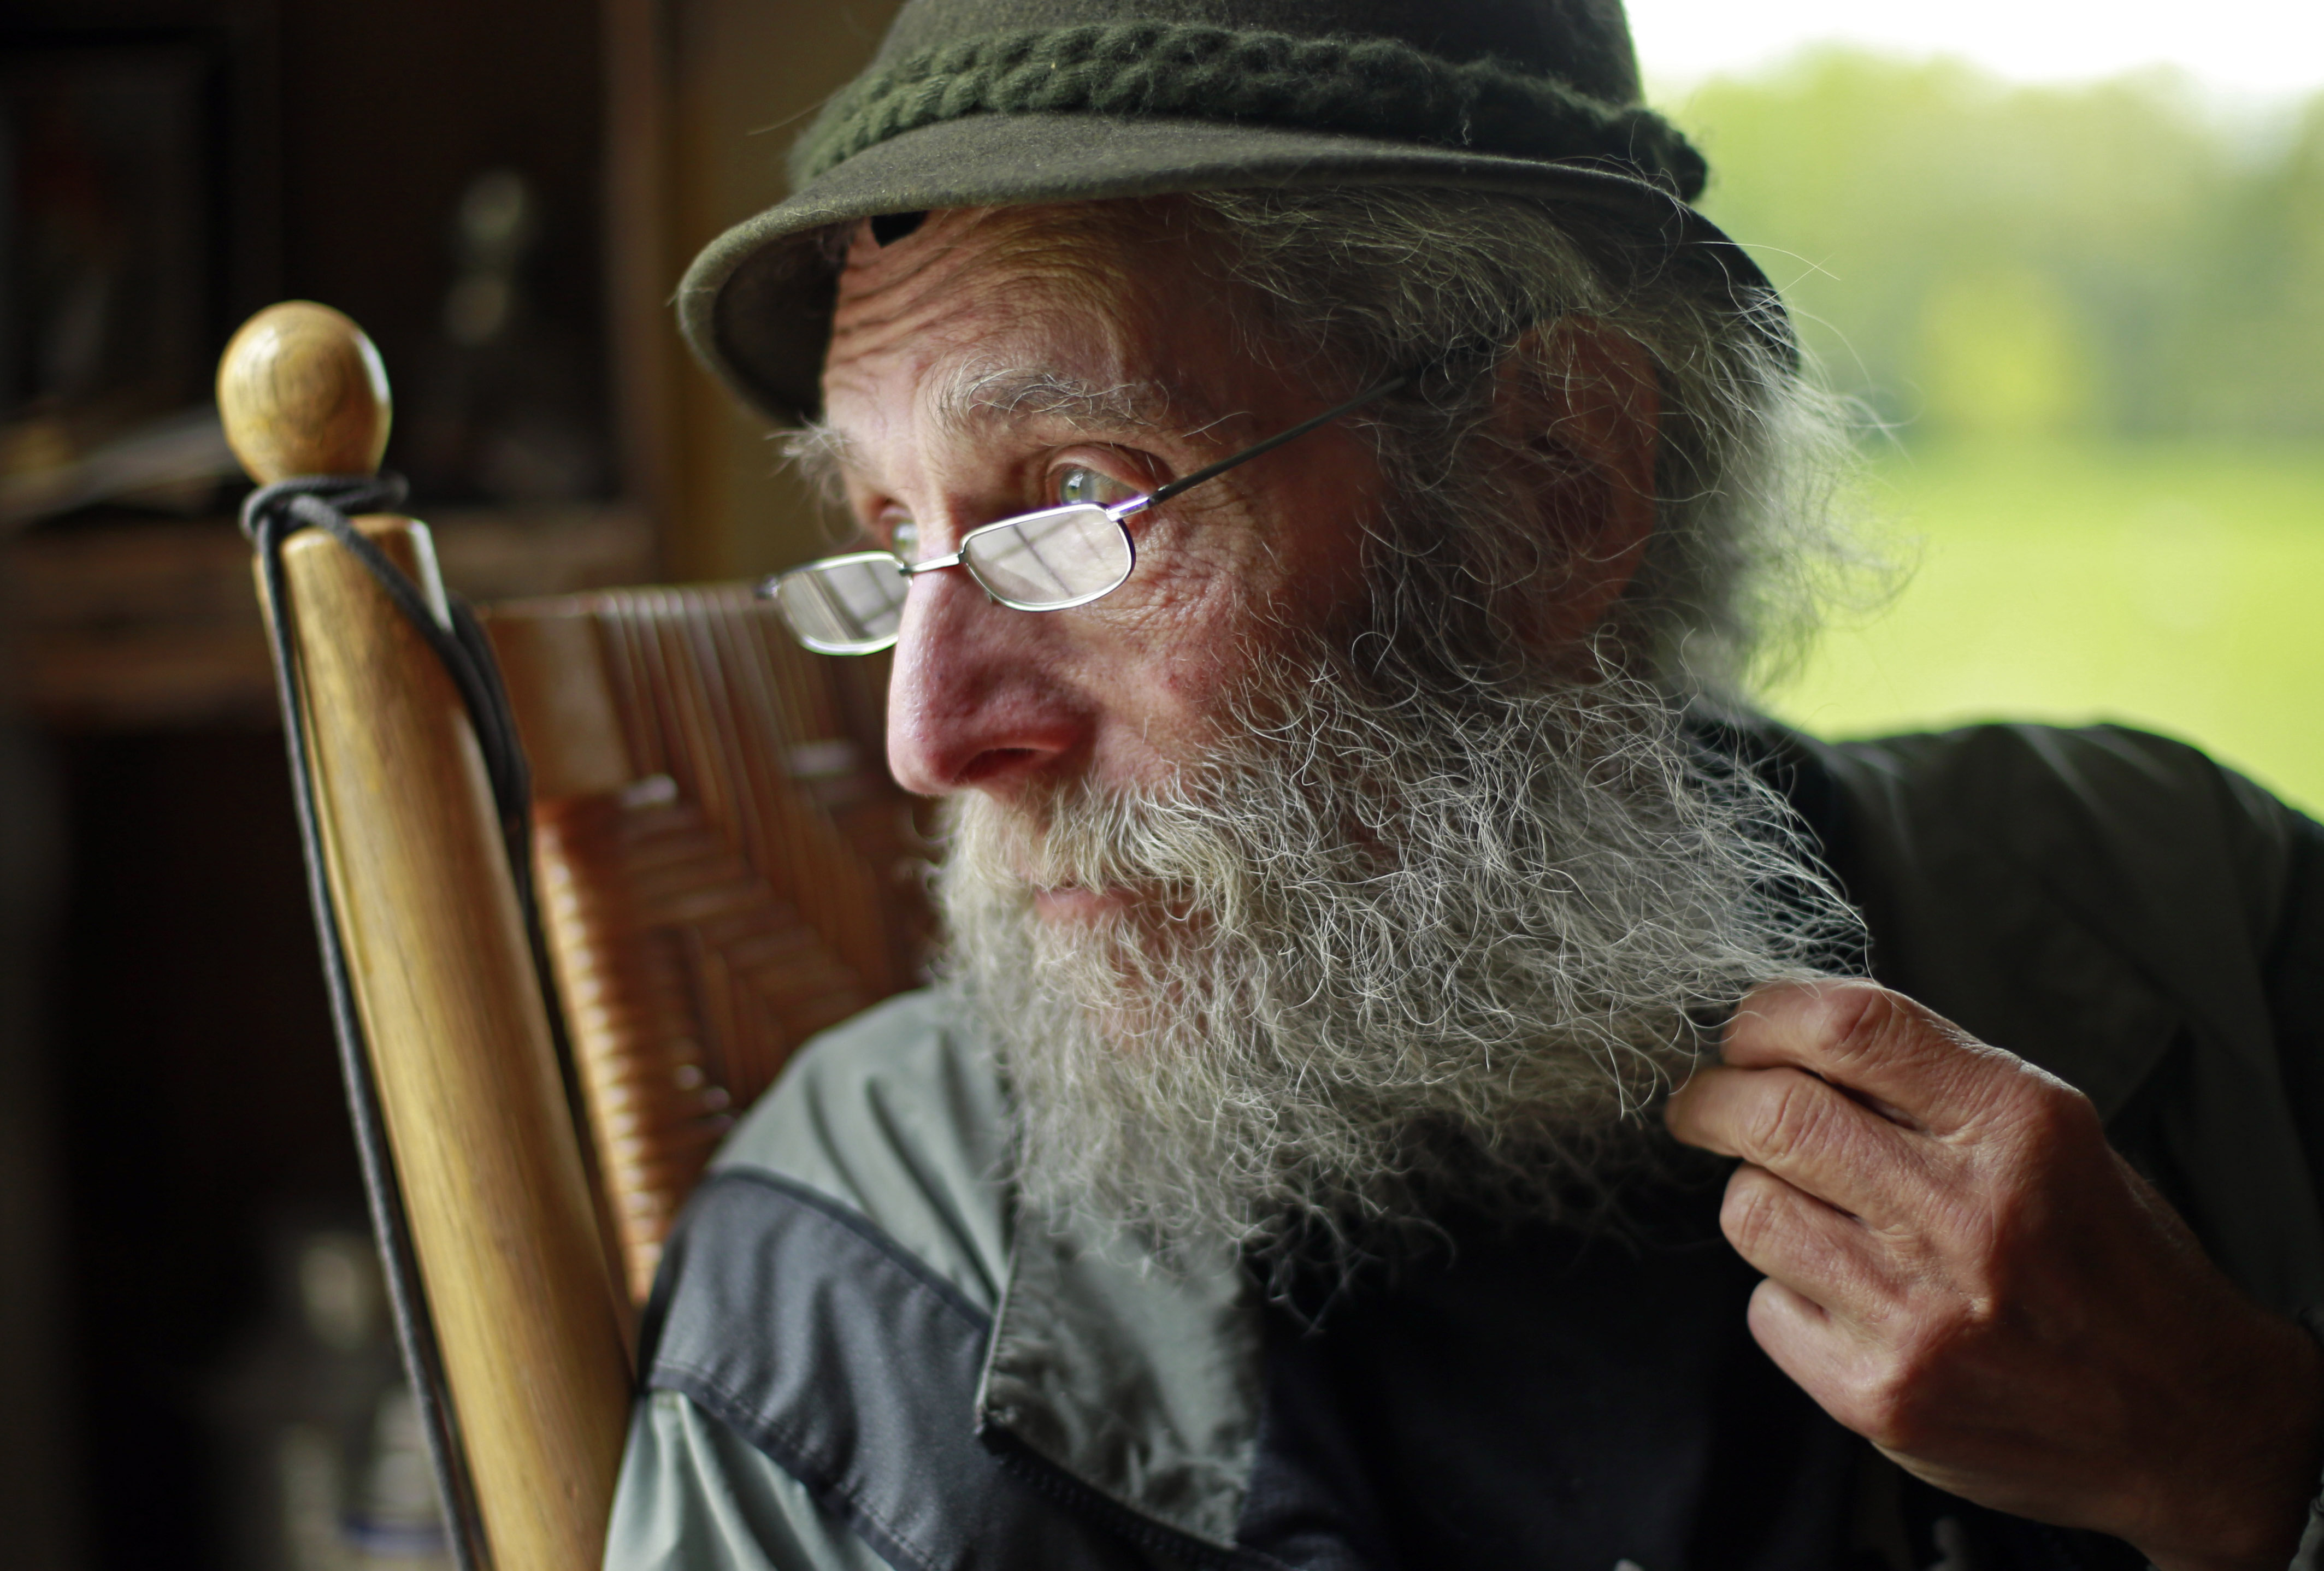  In a May 23, 2014, file photo, Burt Shavitz pauses during an interview to watch a litter of fox kits play near his camp in Parkman, Maine. Shavitz, a former beekeeper, is the Burt behind Burt's Bees. A spokeswoman for Burts Bees said Shavtiz died Sunday, July 5, 2015, at his home in rural Maine. He was 80. (AP Photo/Robert F. Bukaty, File)